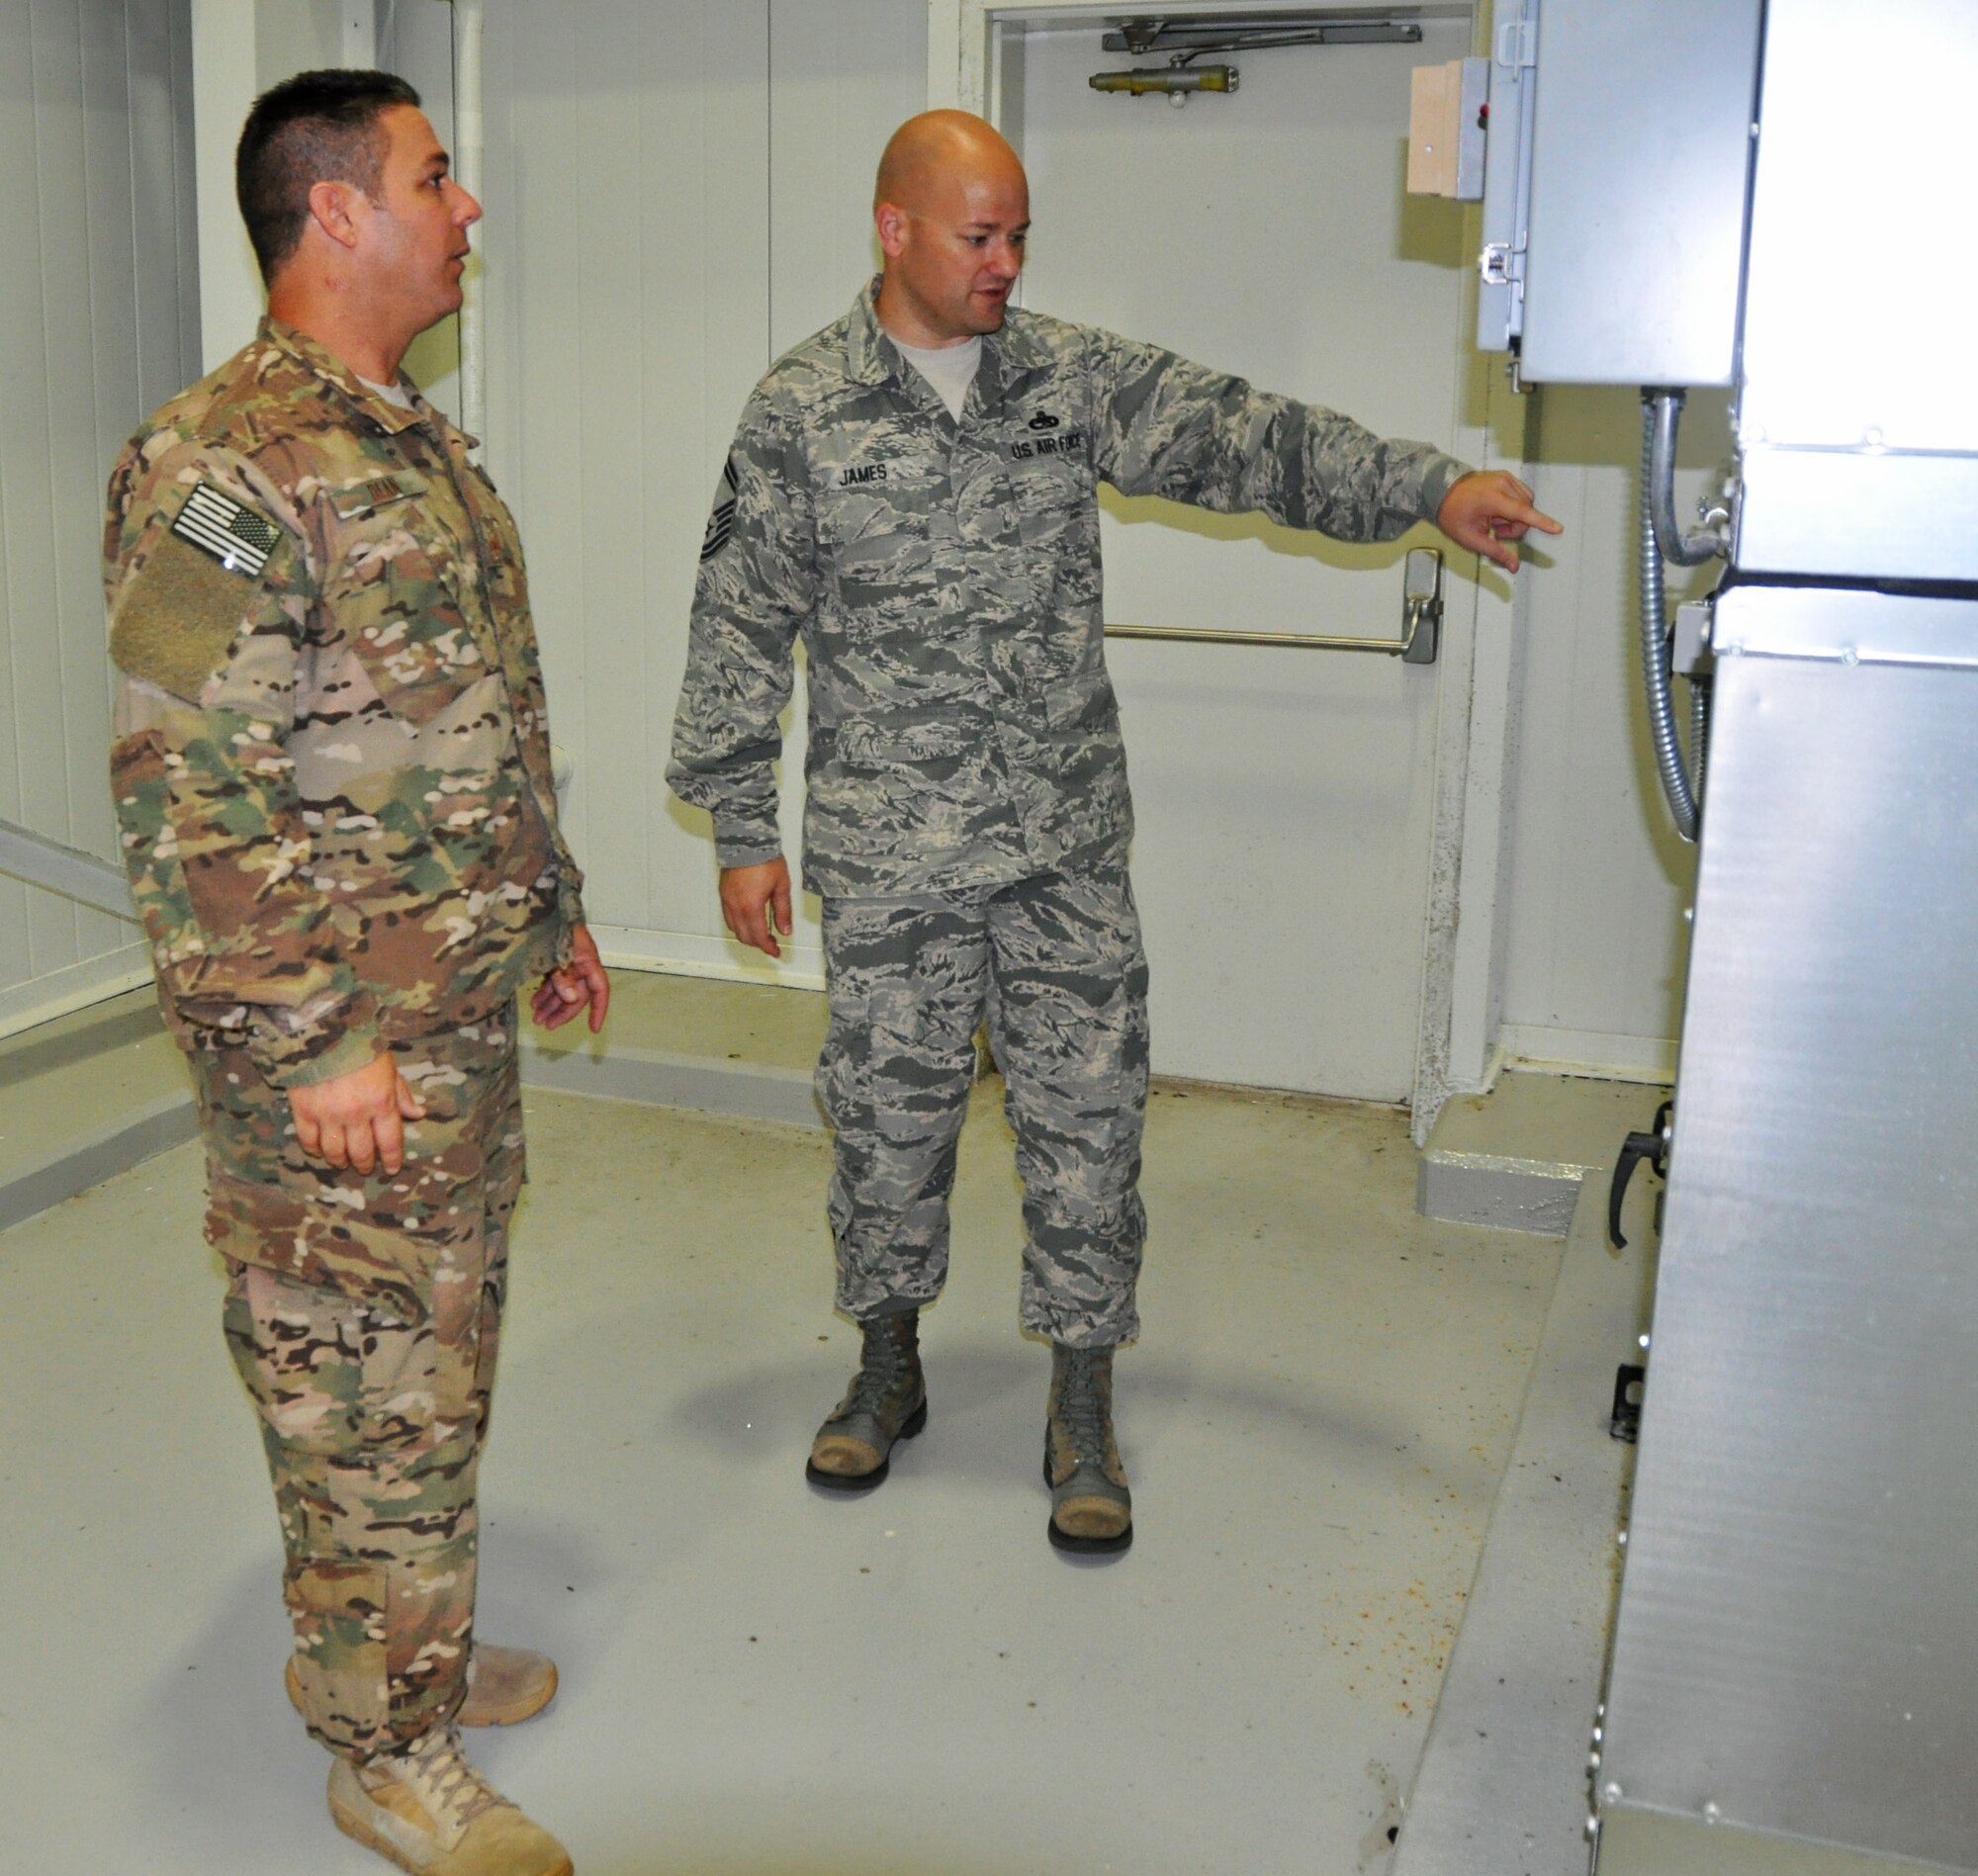 Senior Master Sgt. Trevor James, Air Force Special Operations Command Logistics Directorate superintendent, assesses features on an air handling system with Master Sgt. David Dean, 919th Special Operations Maintenance Squadron, in the fuel cell at Duke Field, Fla., Aug. 26, 2016 during the Site Activation Task Force Visit.  More than 100 functional experts from Air Force Special Operations Command, Air Force Reserve Command, 96th Test Wing (Eglin Air Force Base, Fla.) and 27th Special Operations Wing (Cannon AFB, N.M.) visited Duke Field Aug. 22-26, 2016 to study the impact of changes being made to the Non-Standard Aviation mission here. (U.S. Air Force photo/Dan Neely)